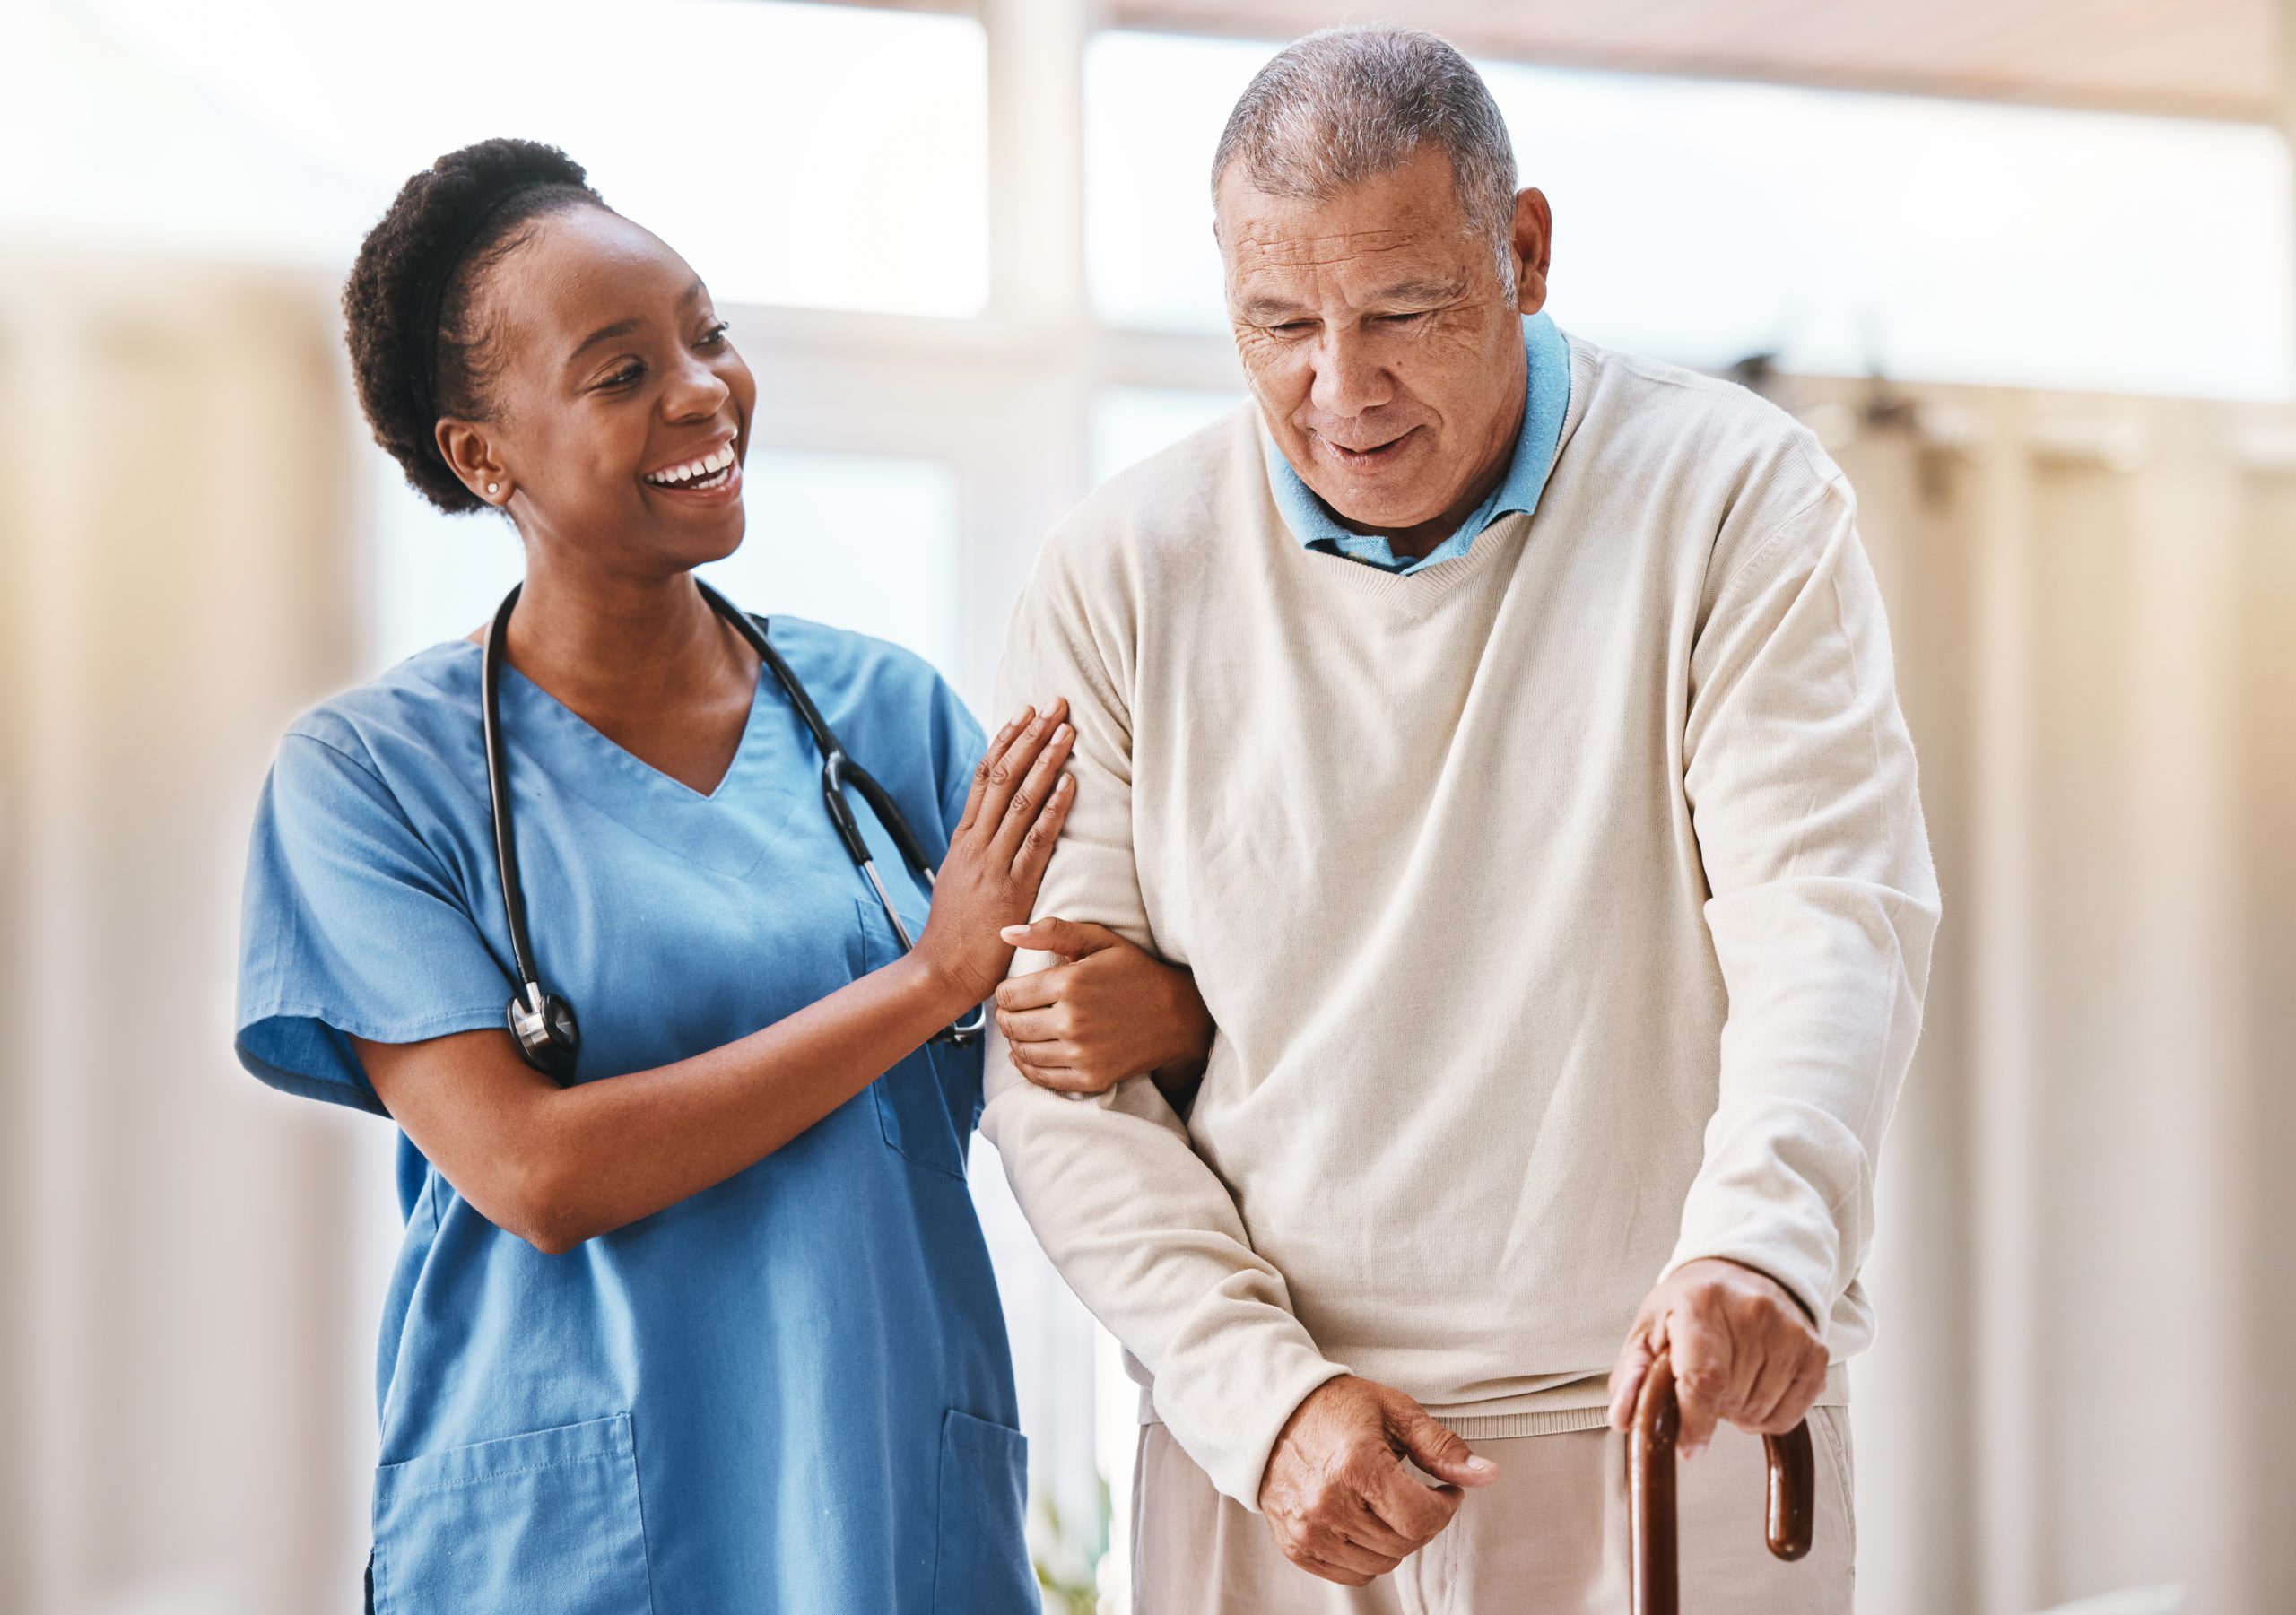 A nurse helping a patient in a skilled nursing facility